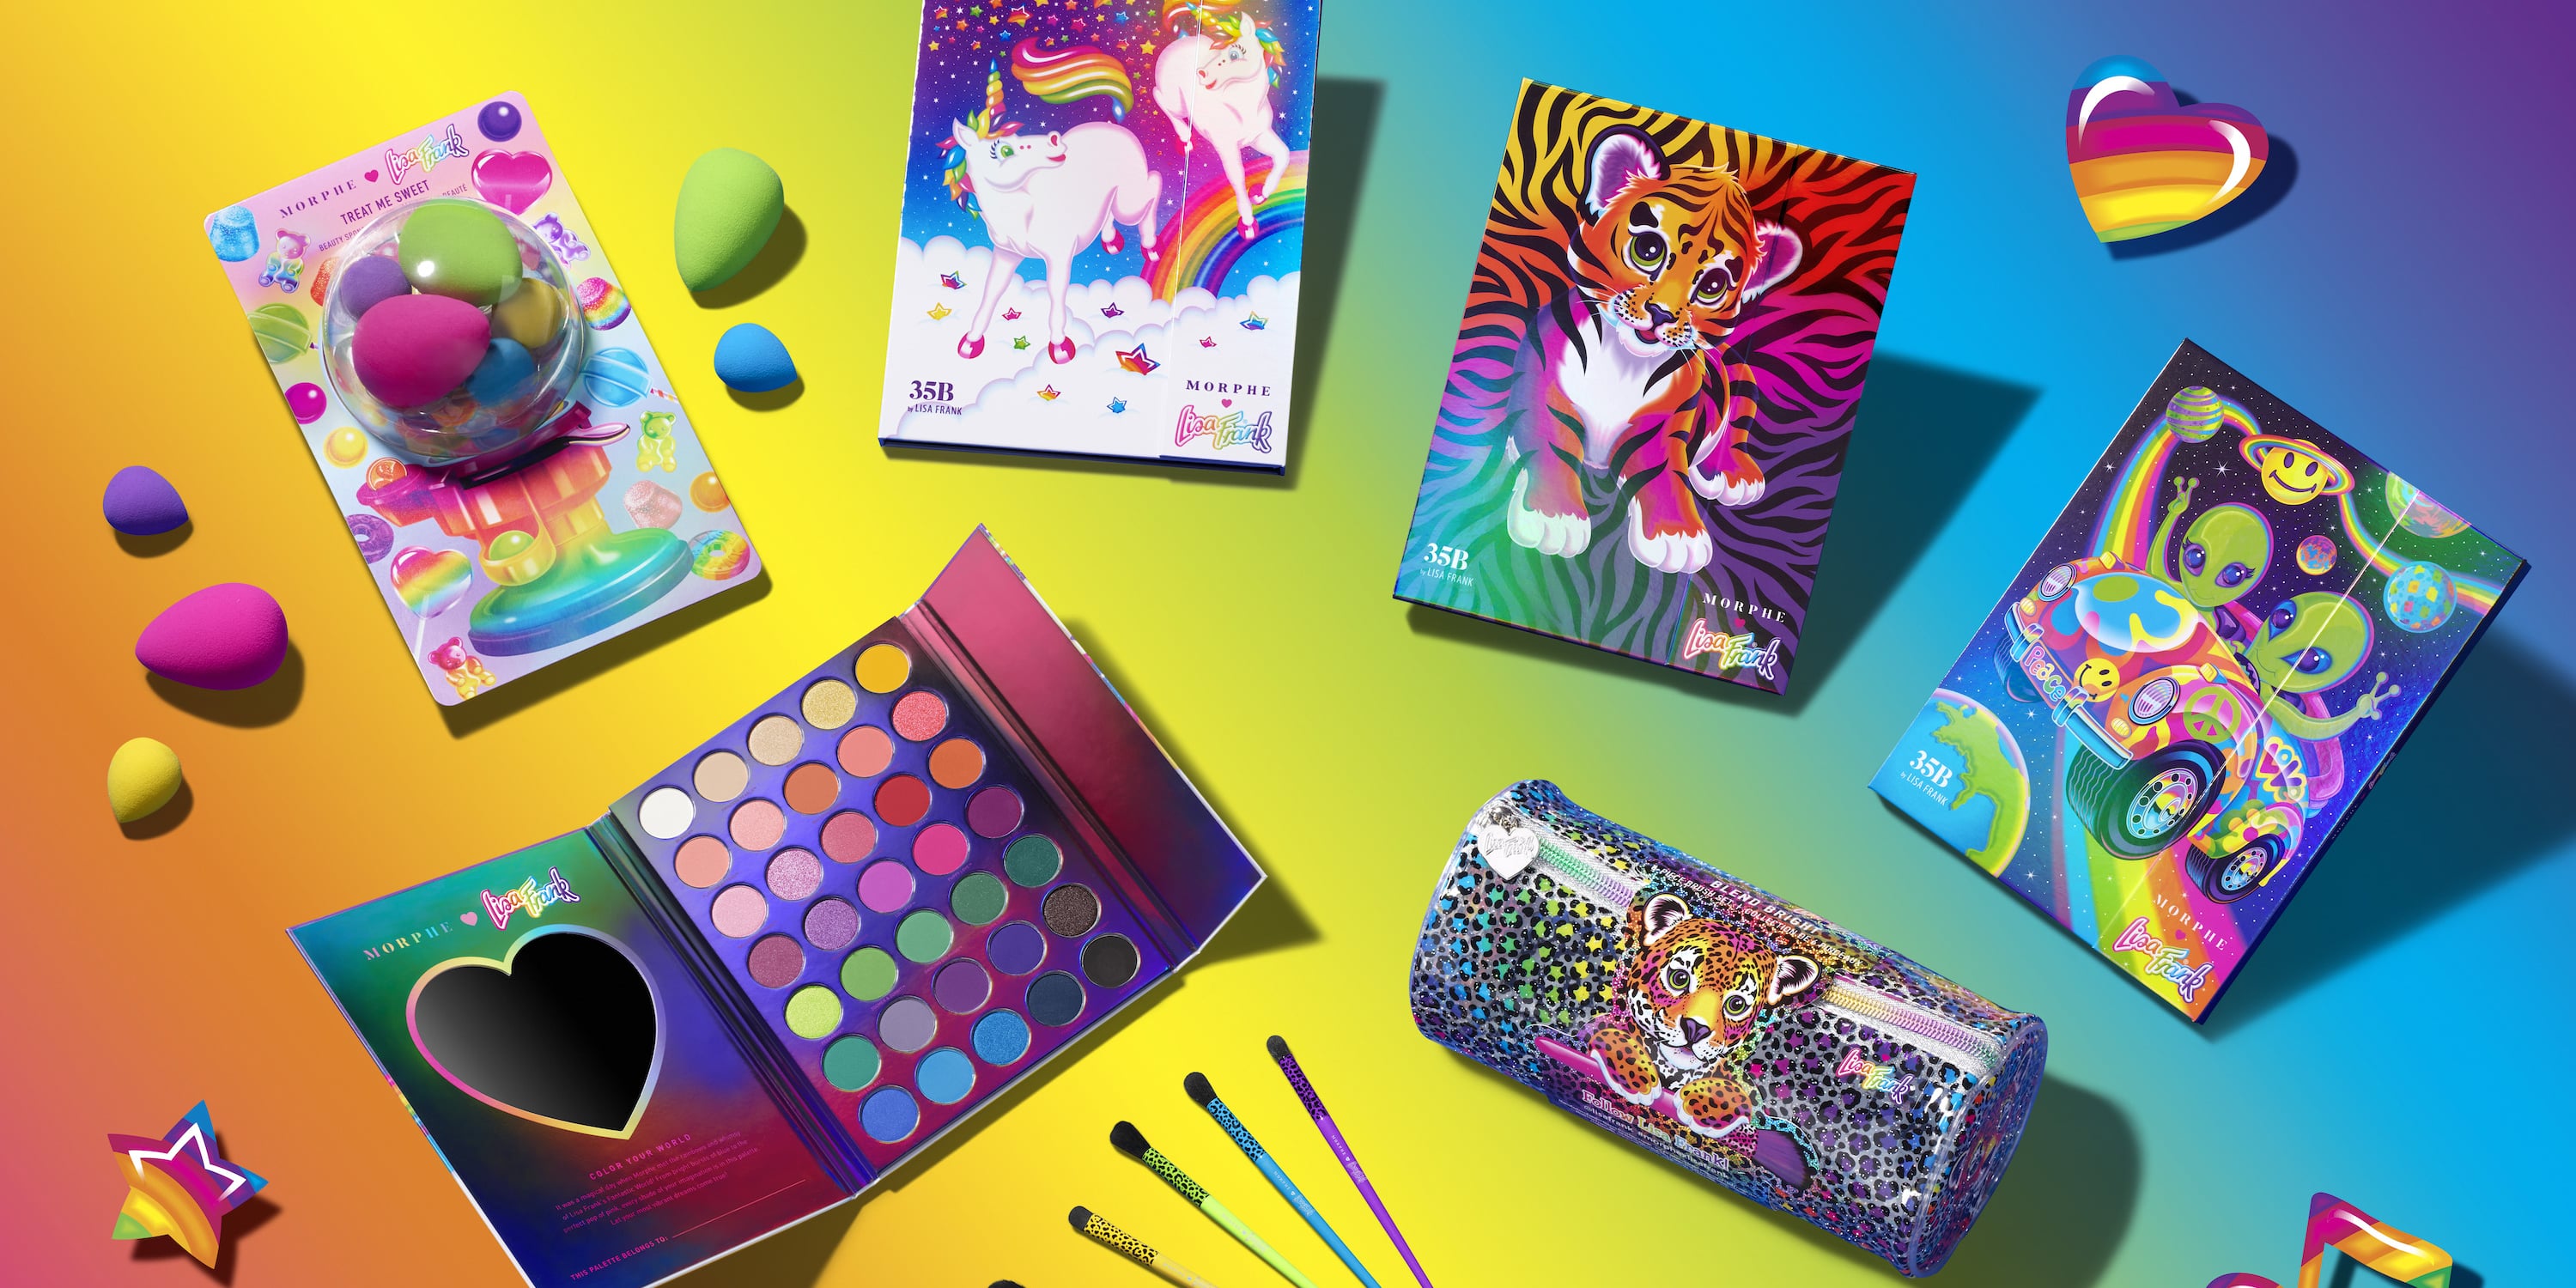 Bring the Lisa Frank Vibes With These Rave Outfits